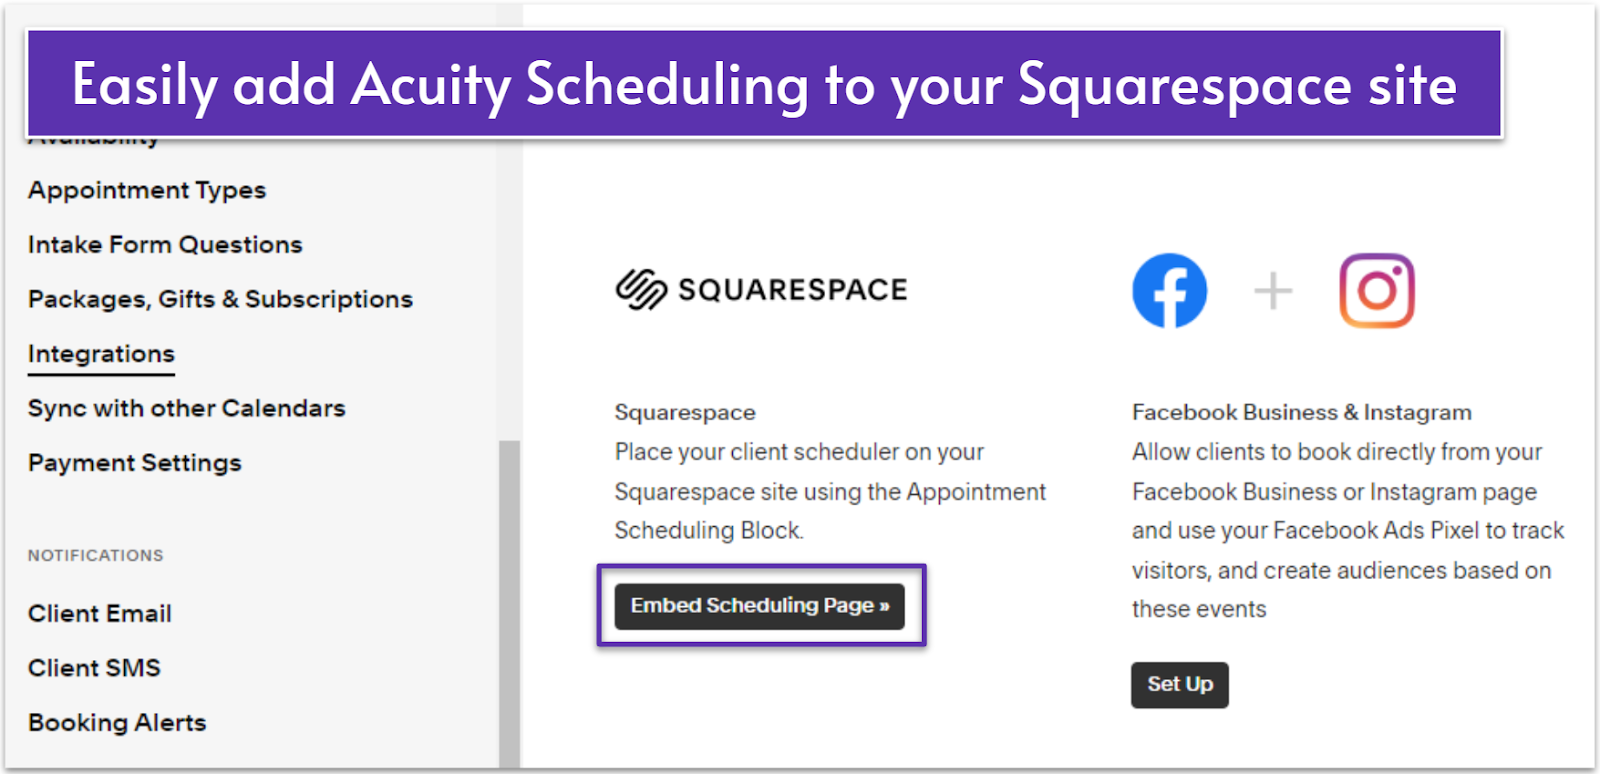 Adding Acuity Scheduling to Squarespace